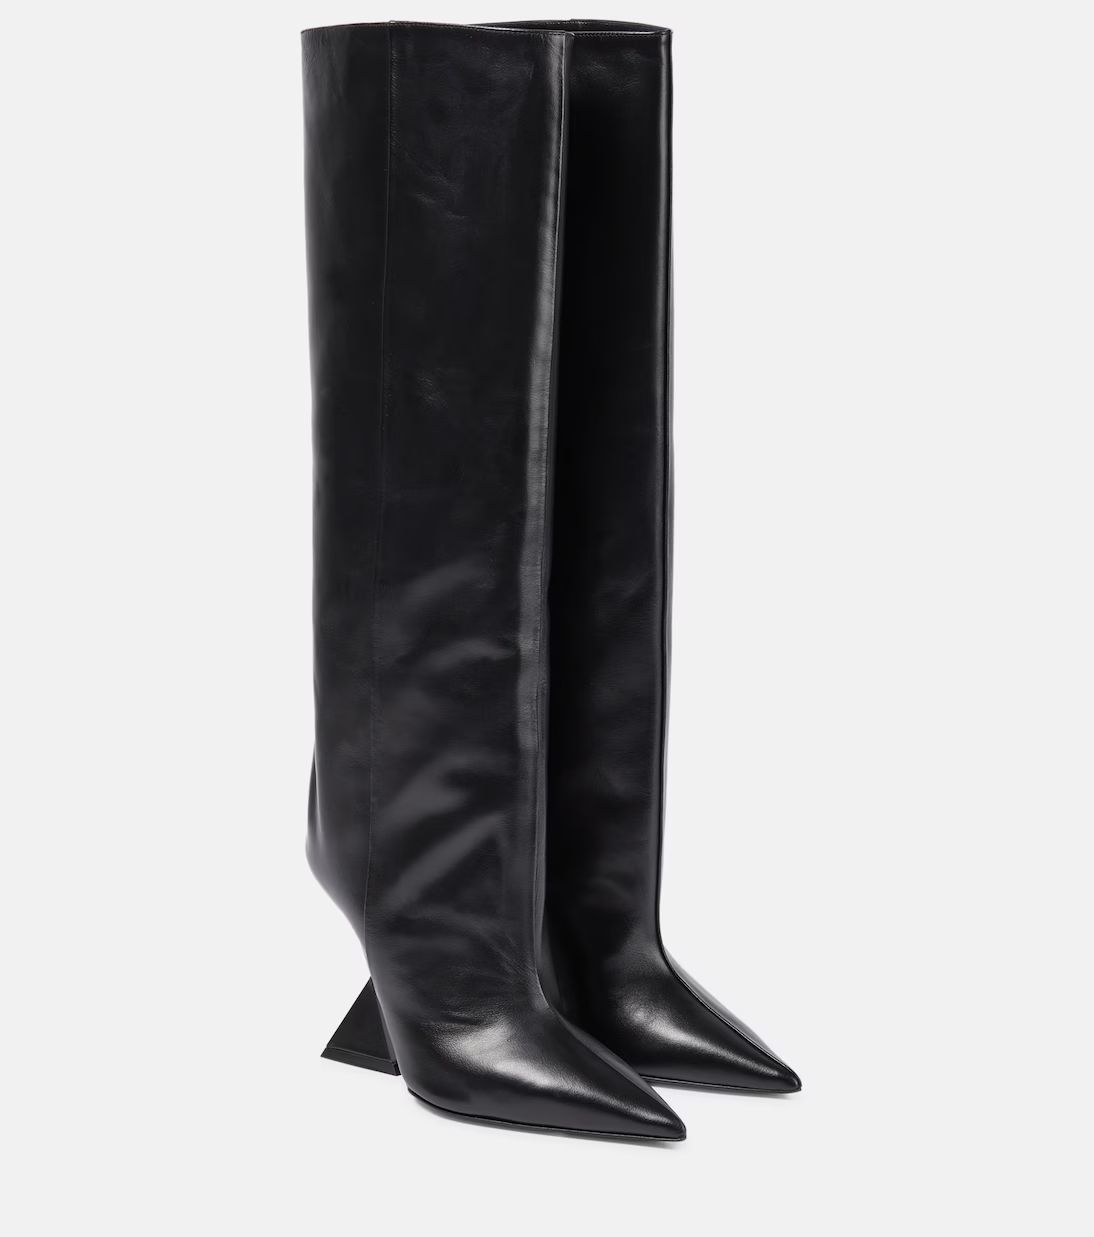 Cheope leather knee-high boots | Mytheresa (US/CA)